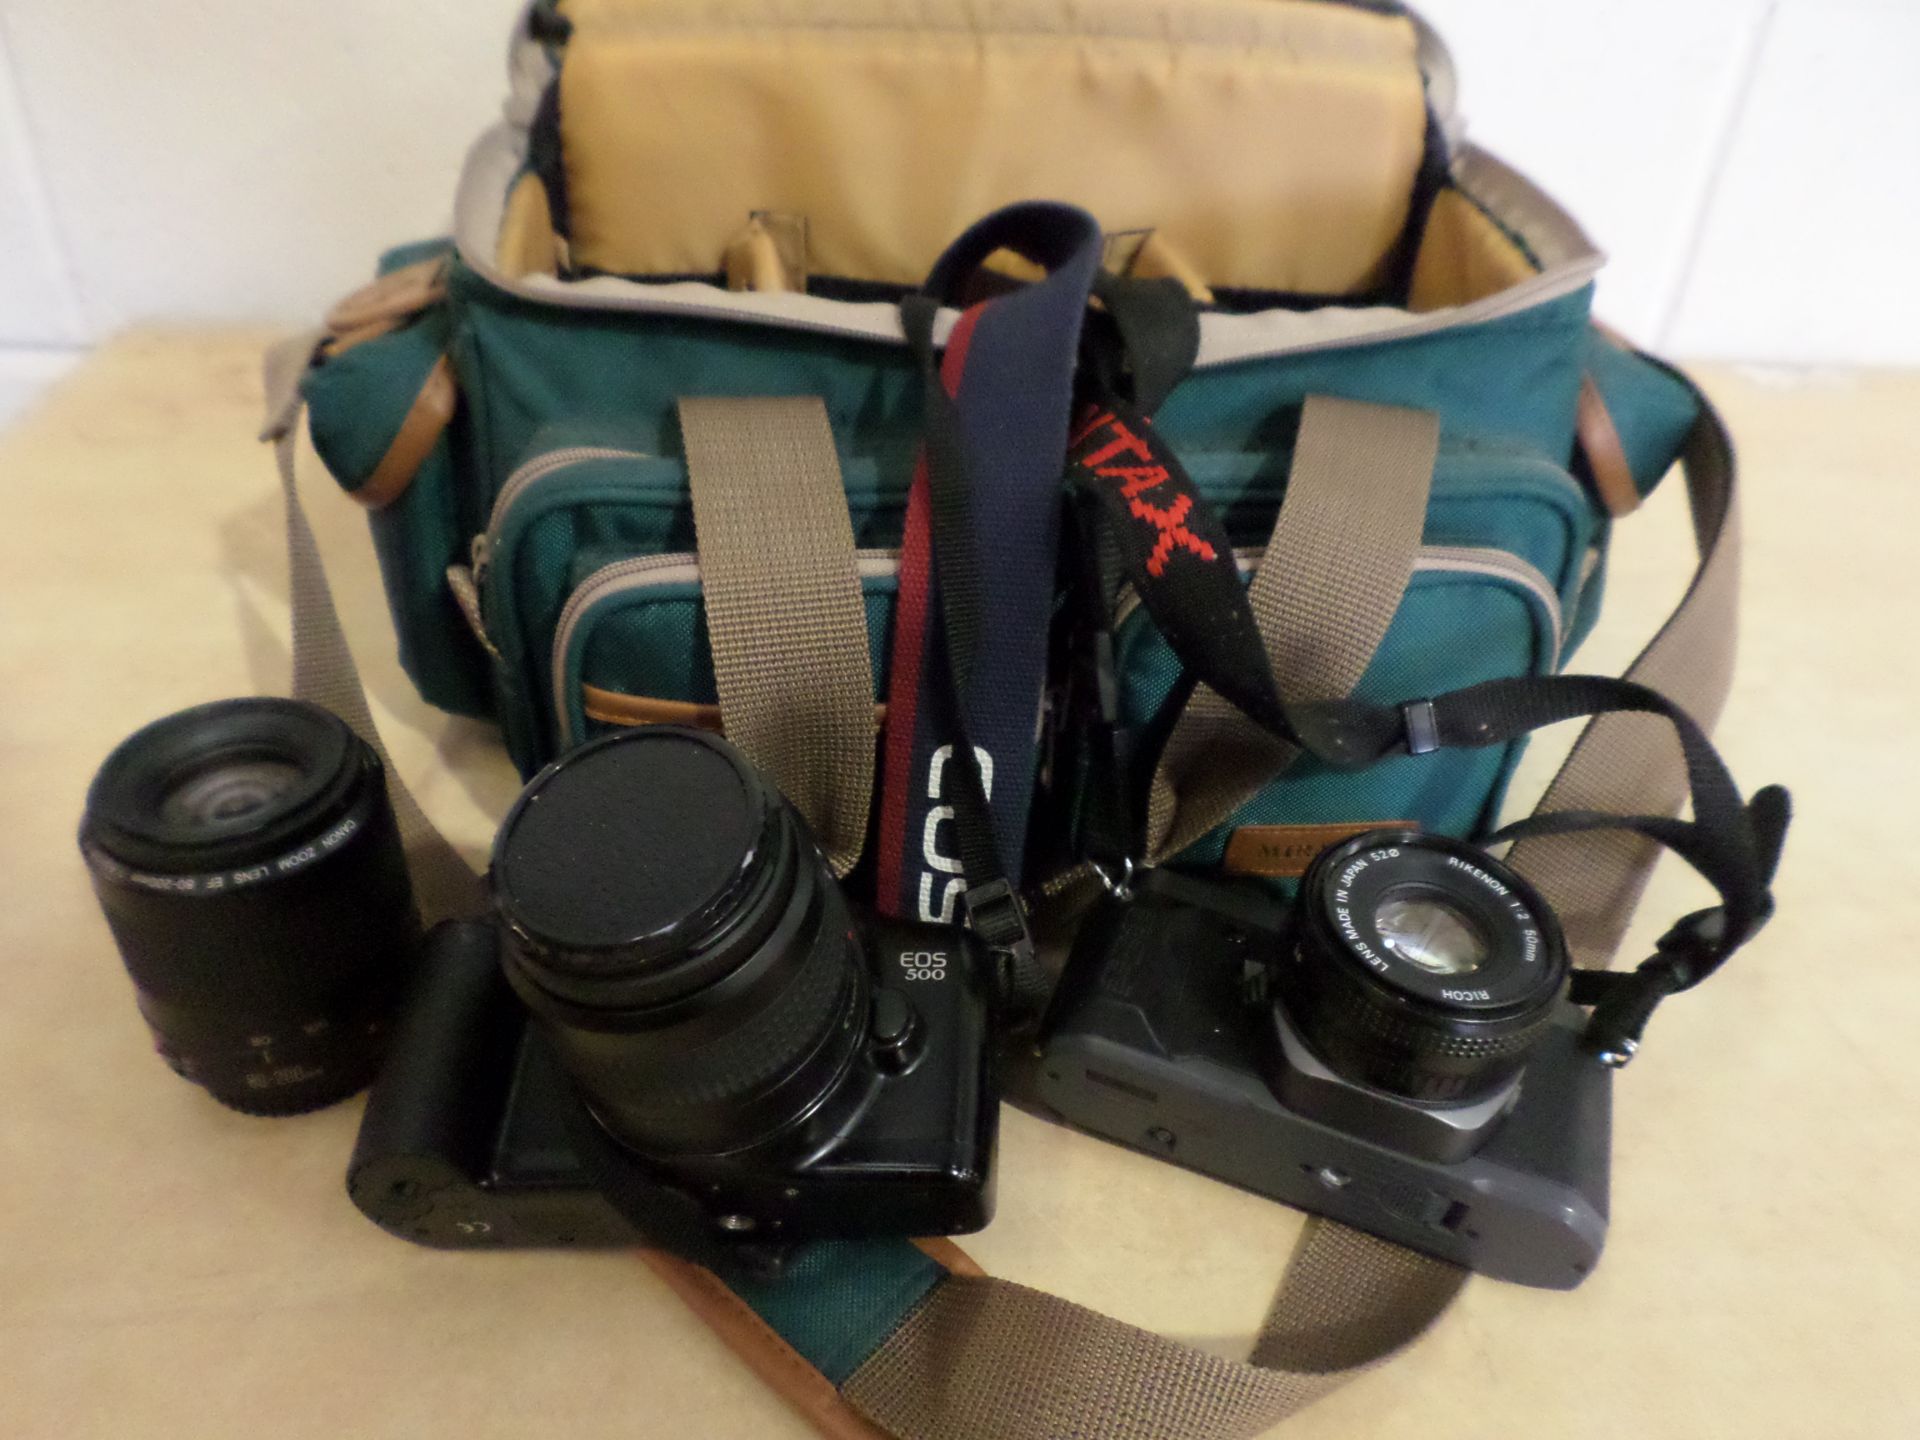 Canon Pentax cameras in carrying case with extra lenses, good condition